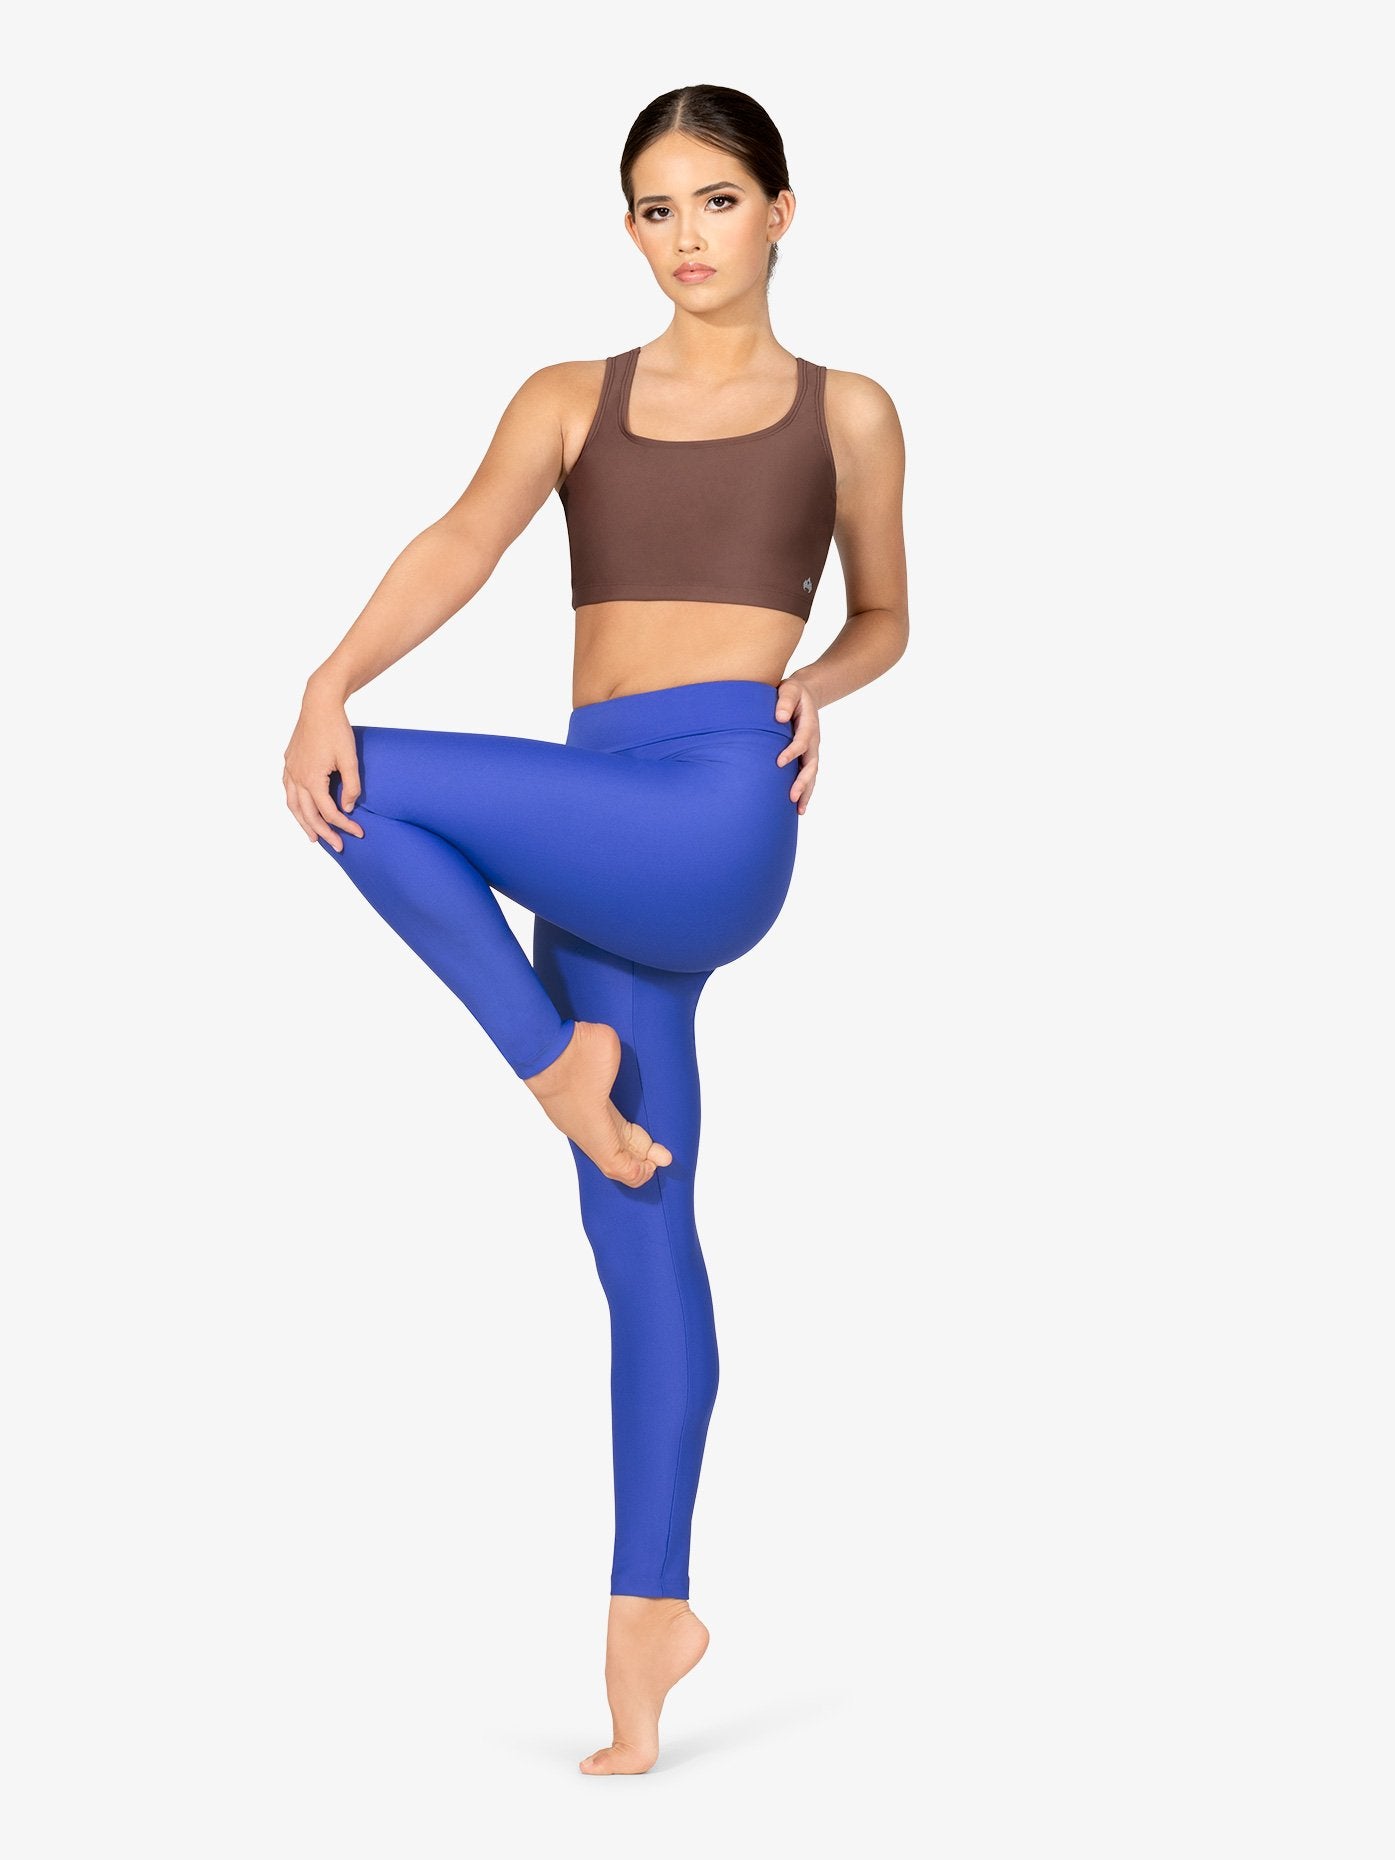 Women’s butter soft blue leggings offering comfort and style